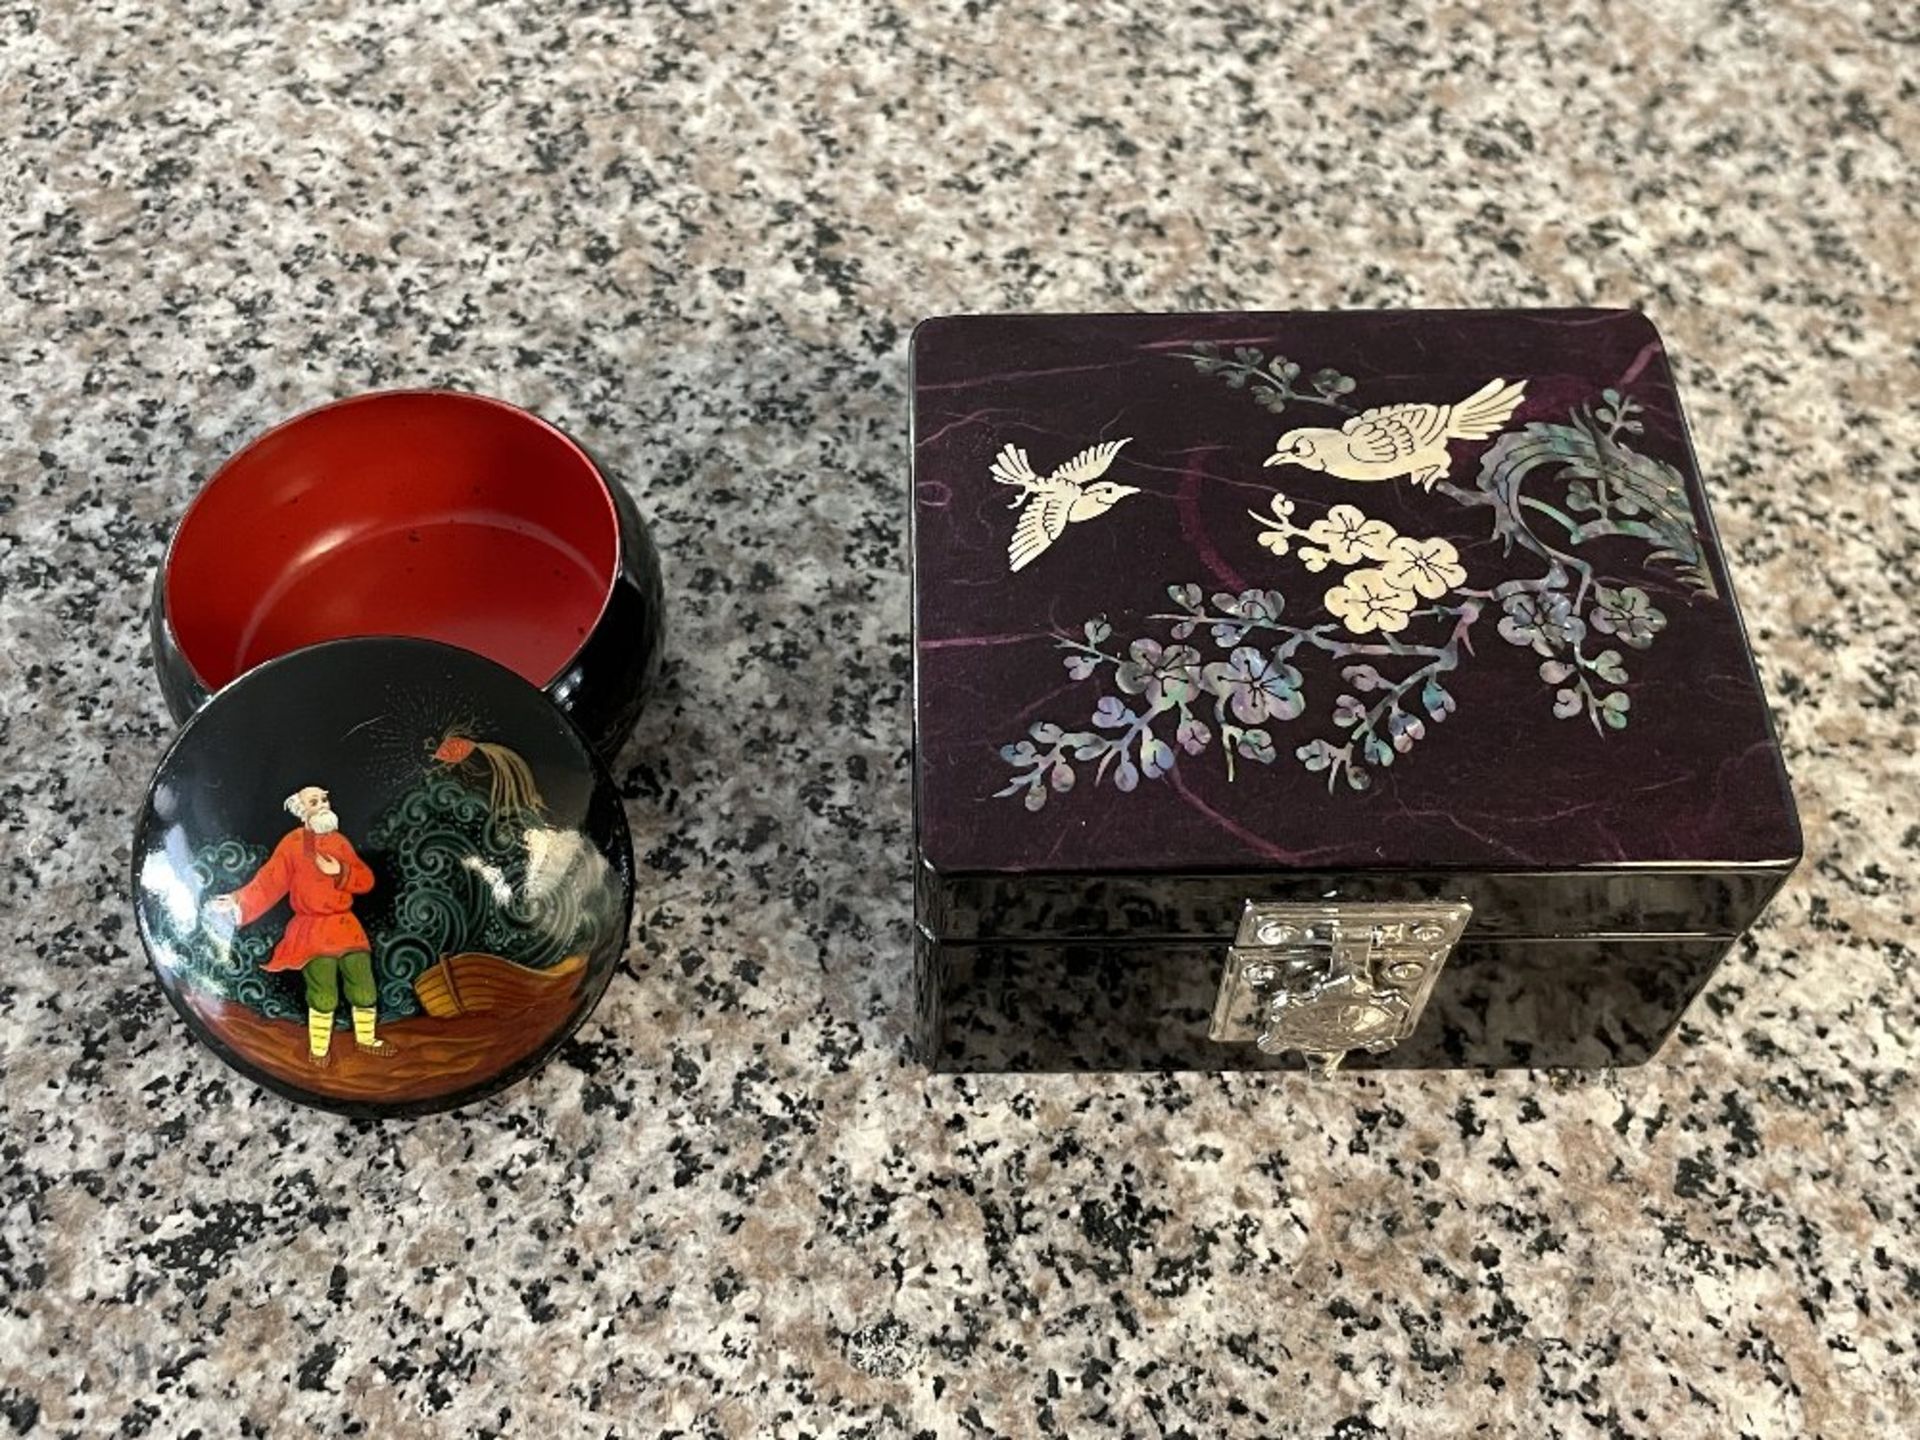 2 East Asian Wood Jewelry Boxes with beautiful inlay design. One says made in USSR.